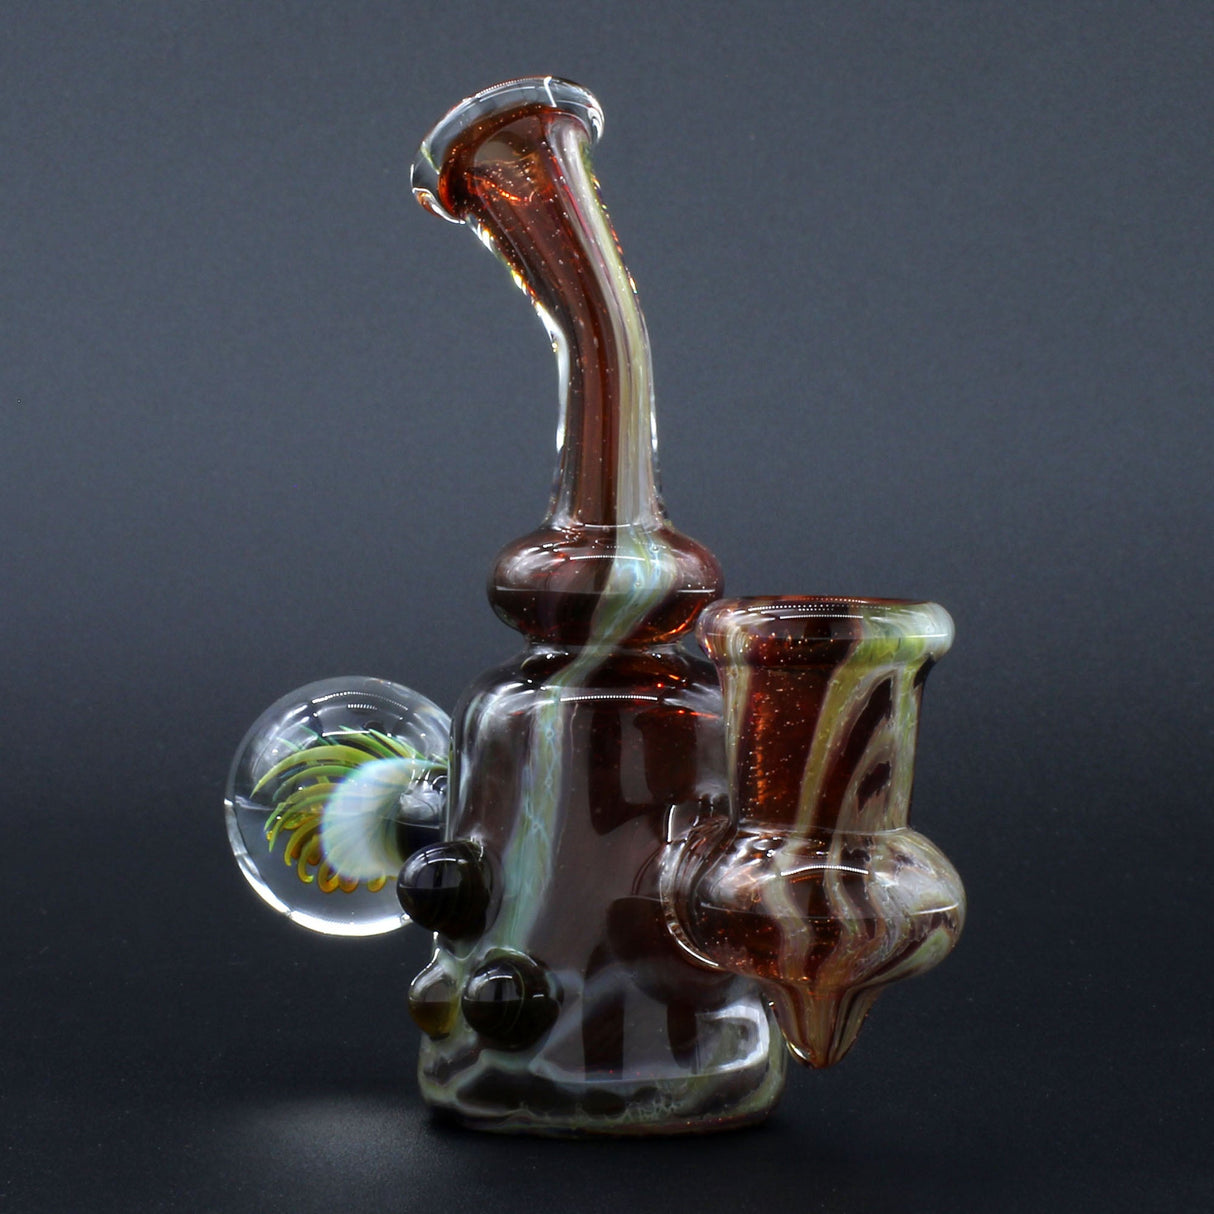 Clayball Glass "Blood Moon" Heady Sherlock Dab Rig with intricate design, 5" height, and 14mm joint